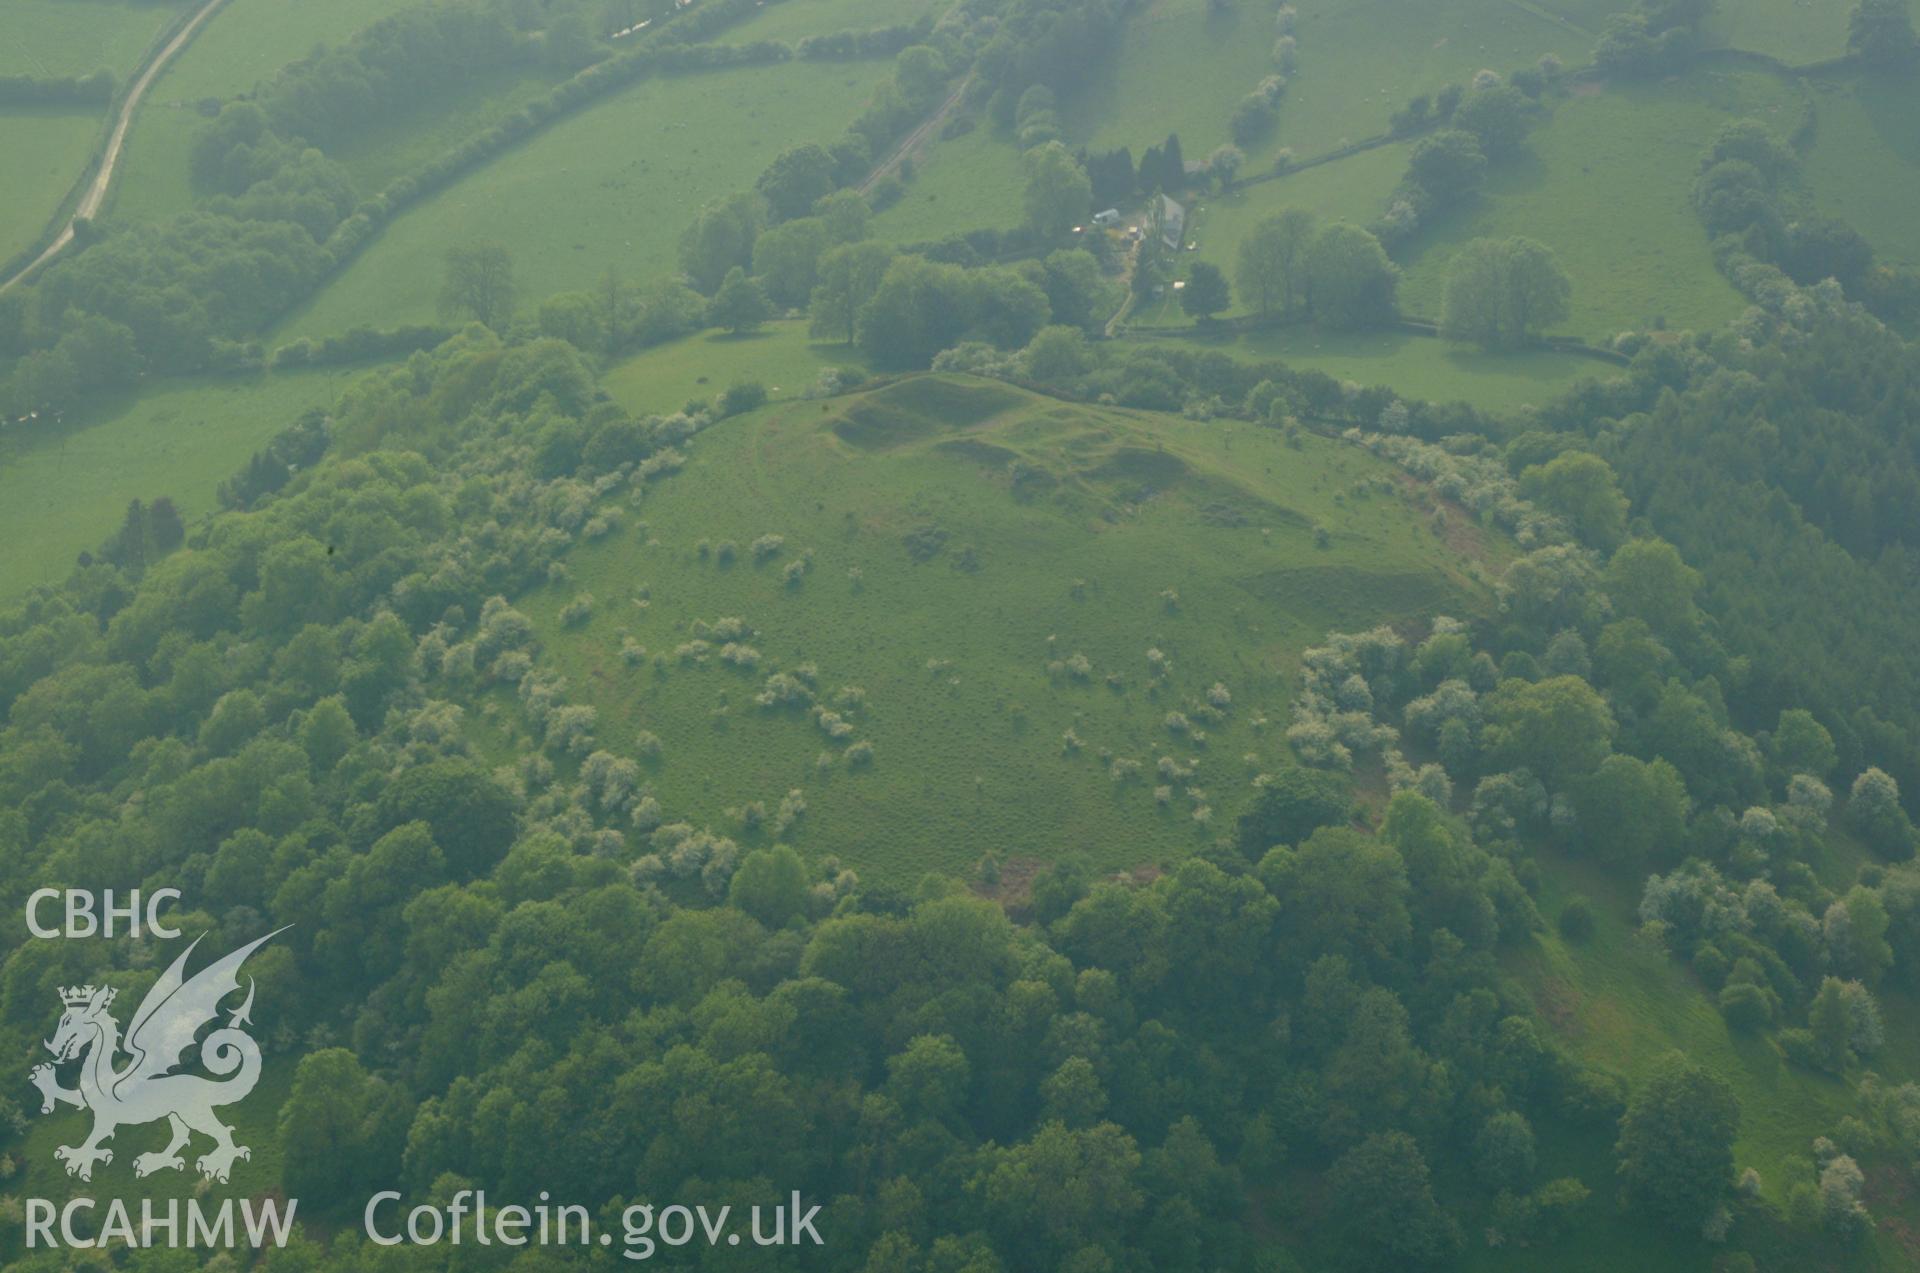 RCAHMW colour oblique aerial photograph of Twyn-y-gaer Camp taken on 27/05/2004 by Toby Driver